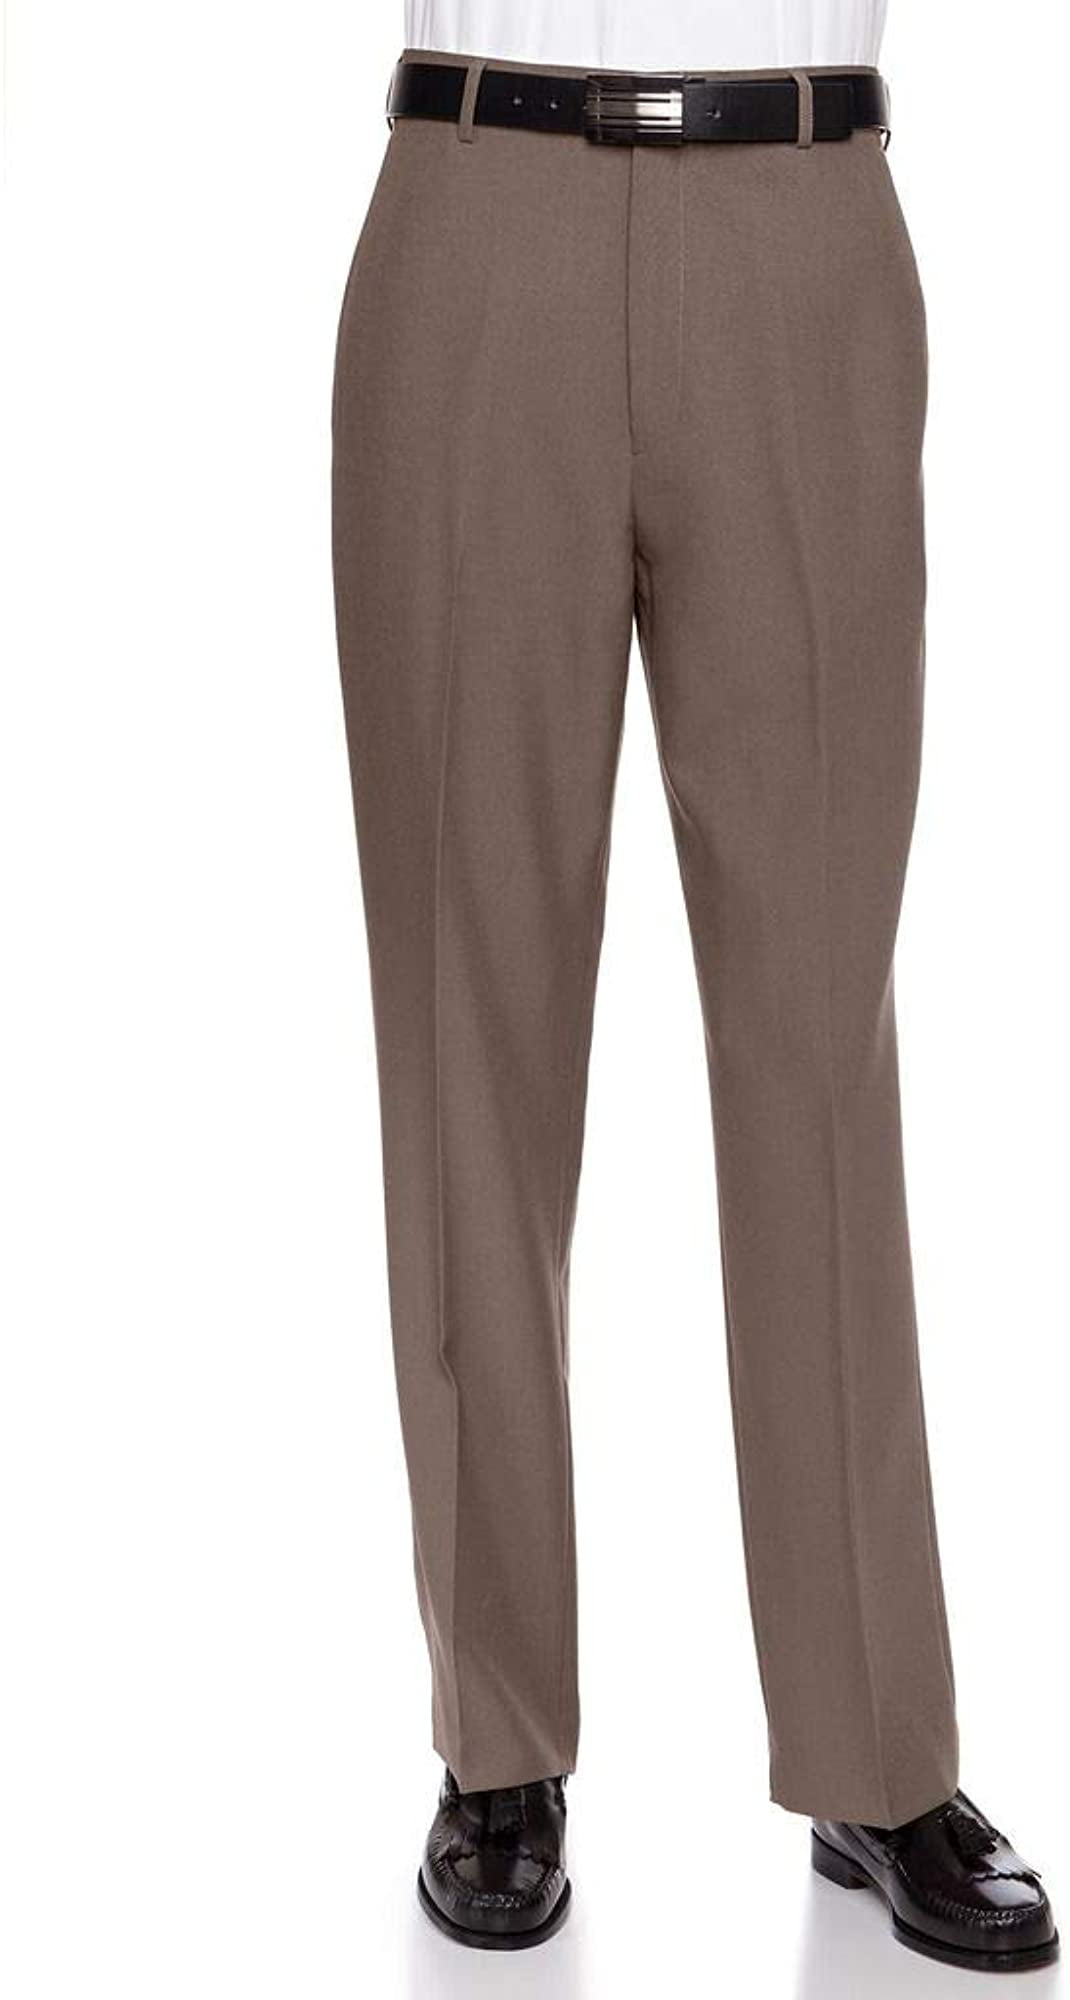 RGM Mens Flat Front Dress Pant Modern Fit Perfect for Every Day! 